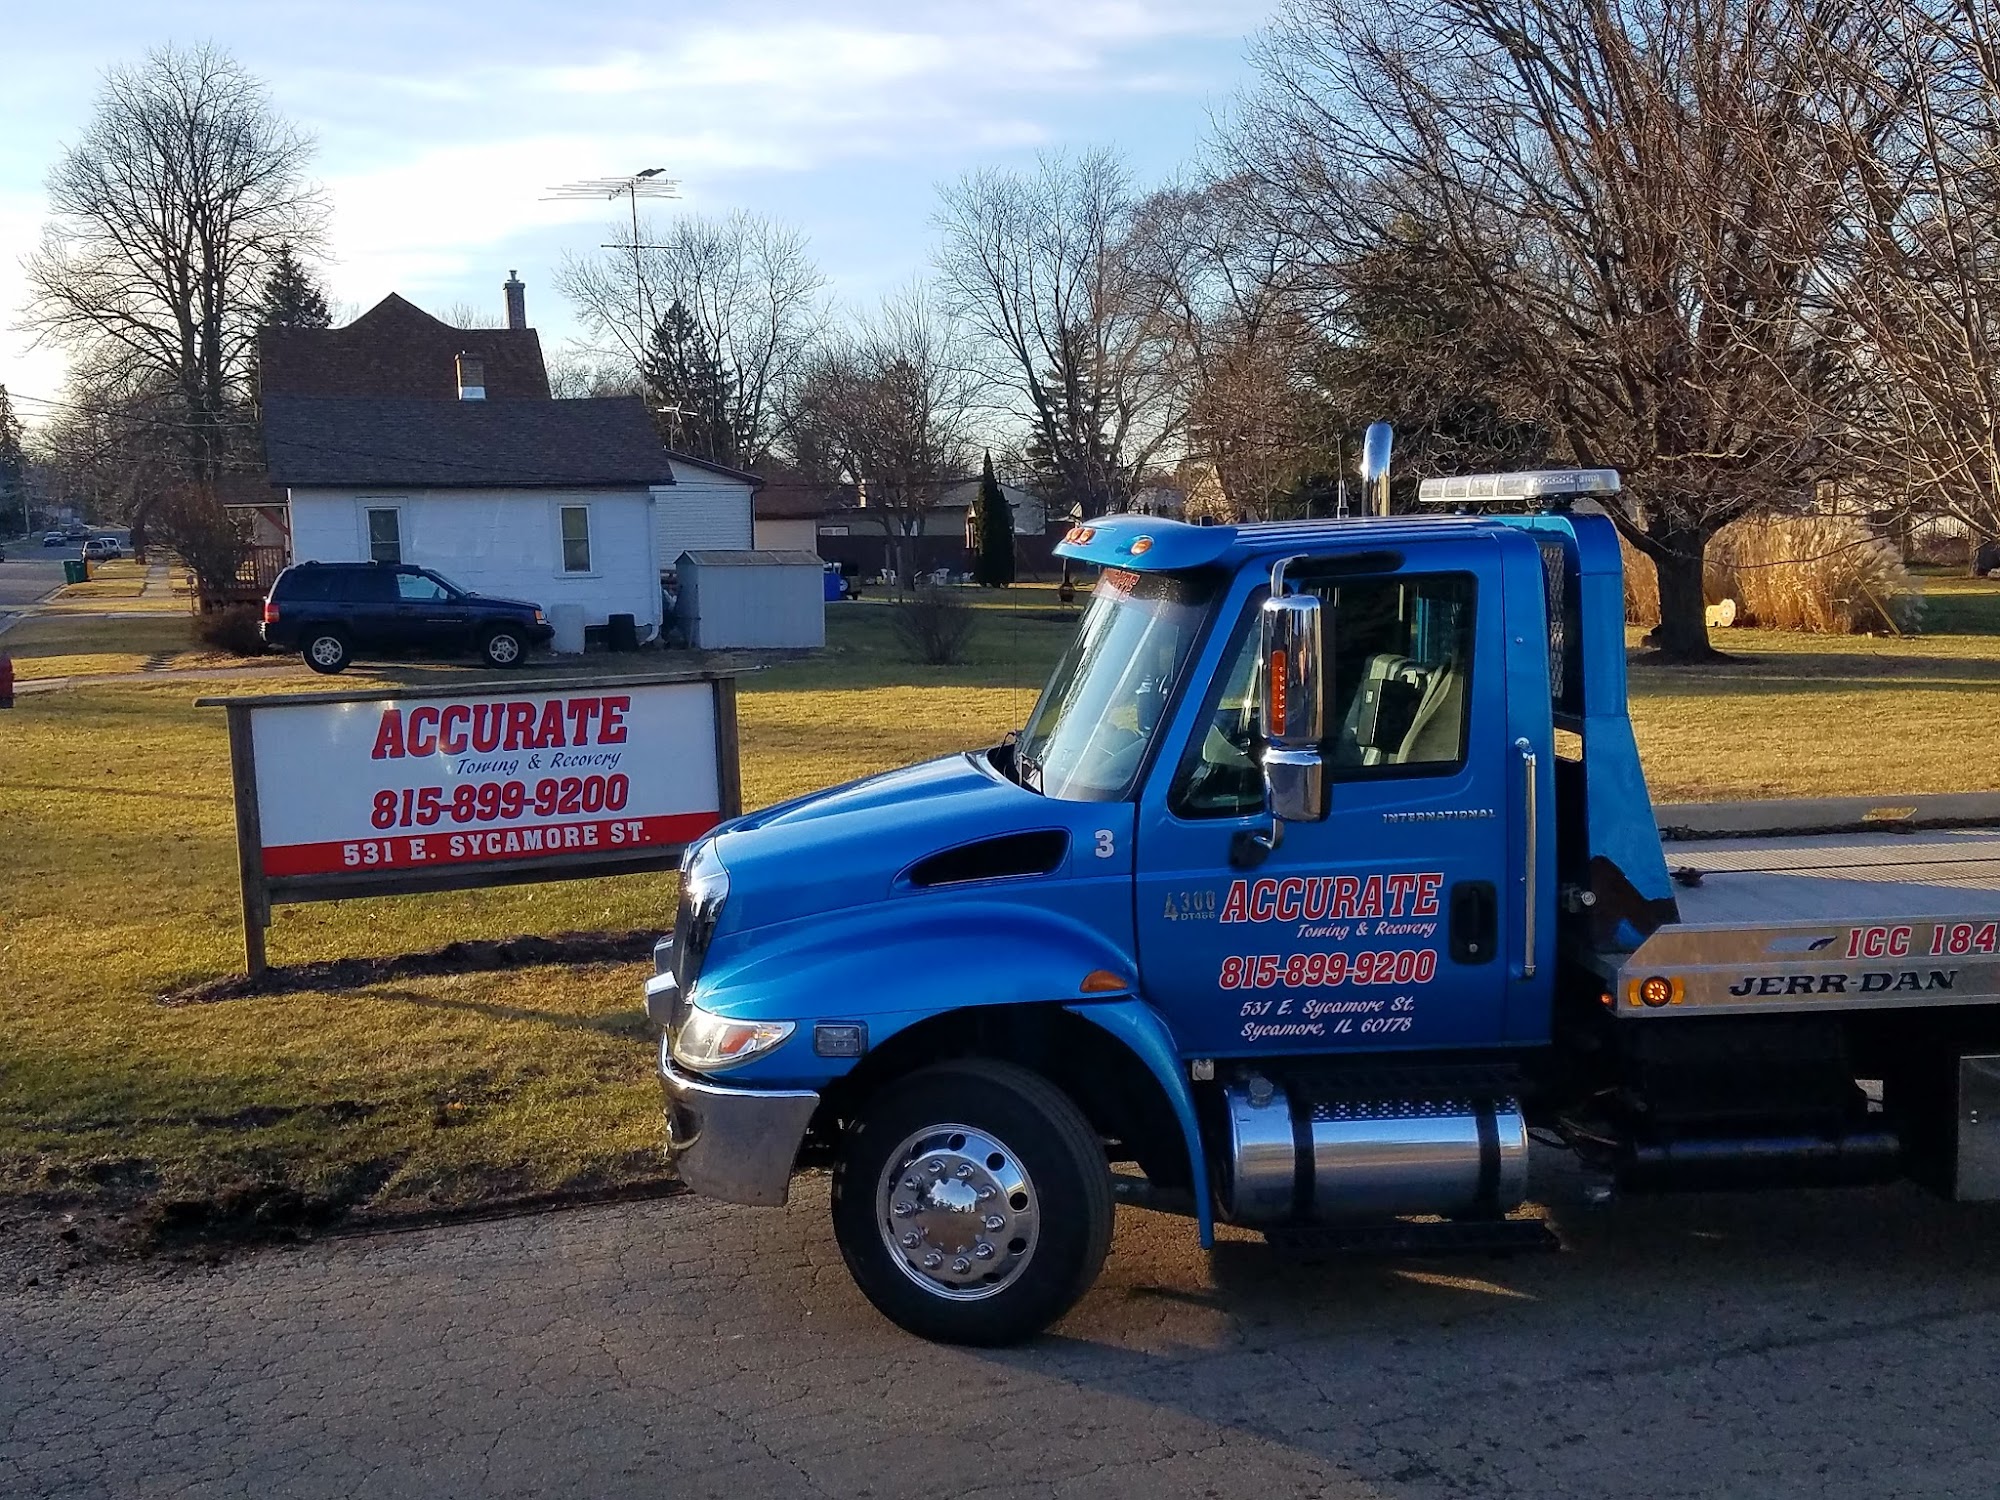 Accurate Towing & Recovery